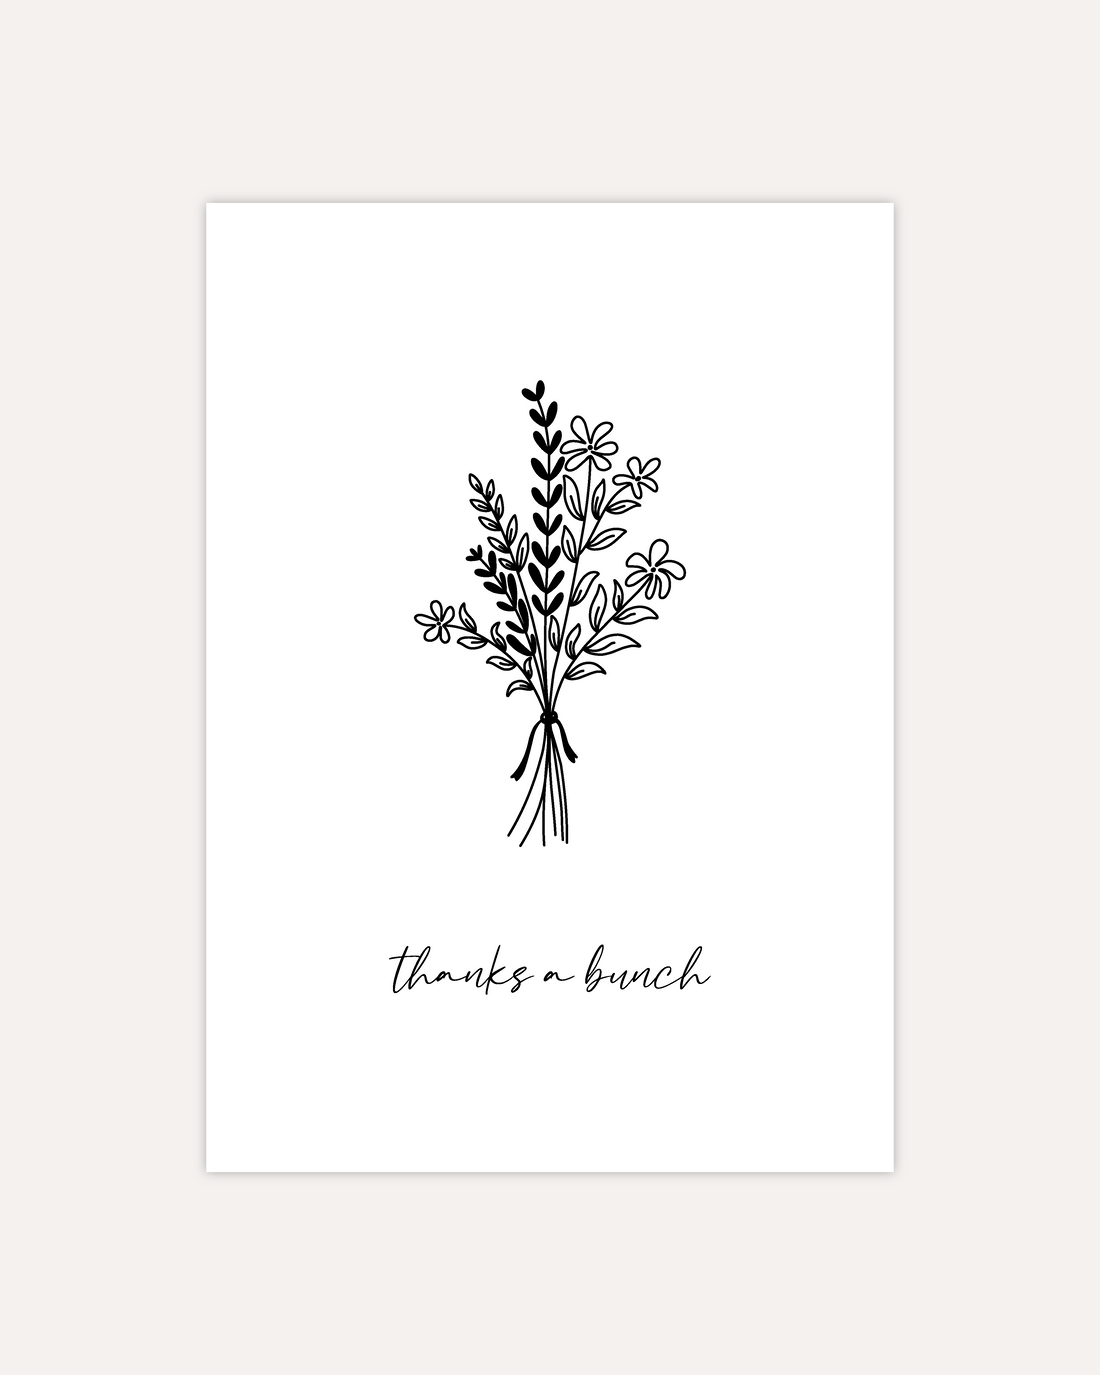 A postcard design showing a line art drawing of a bouquet of some flowers and branches, with a line of cursive writing below, that says &quot;thanks a bunch&quot;. The design is shown on a beige background.